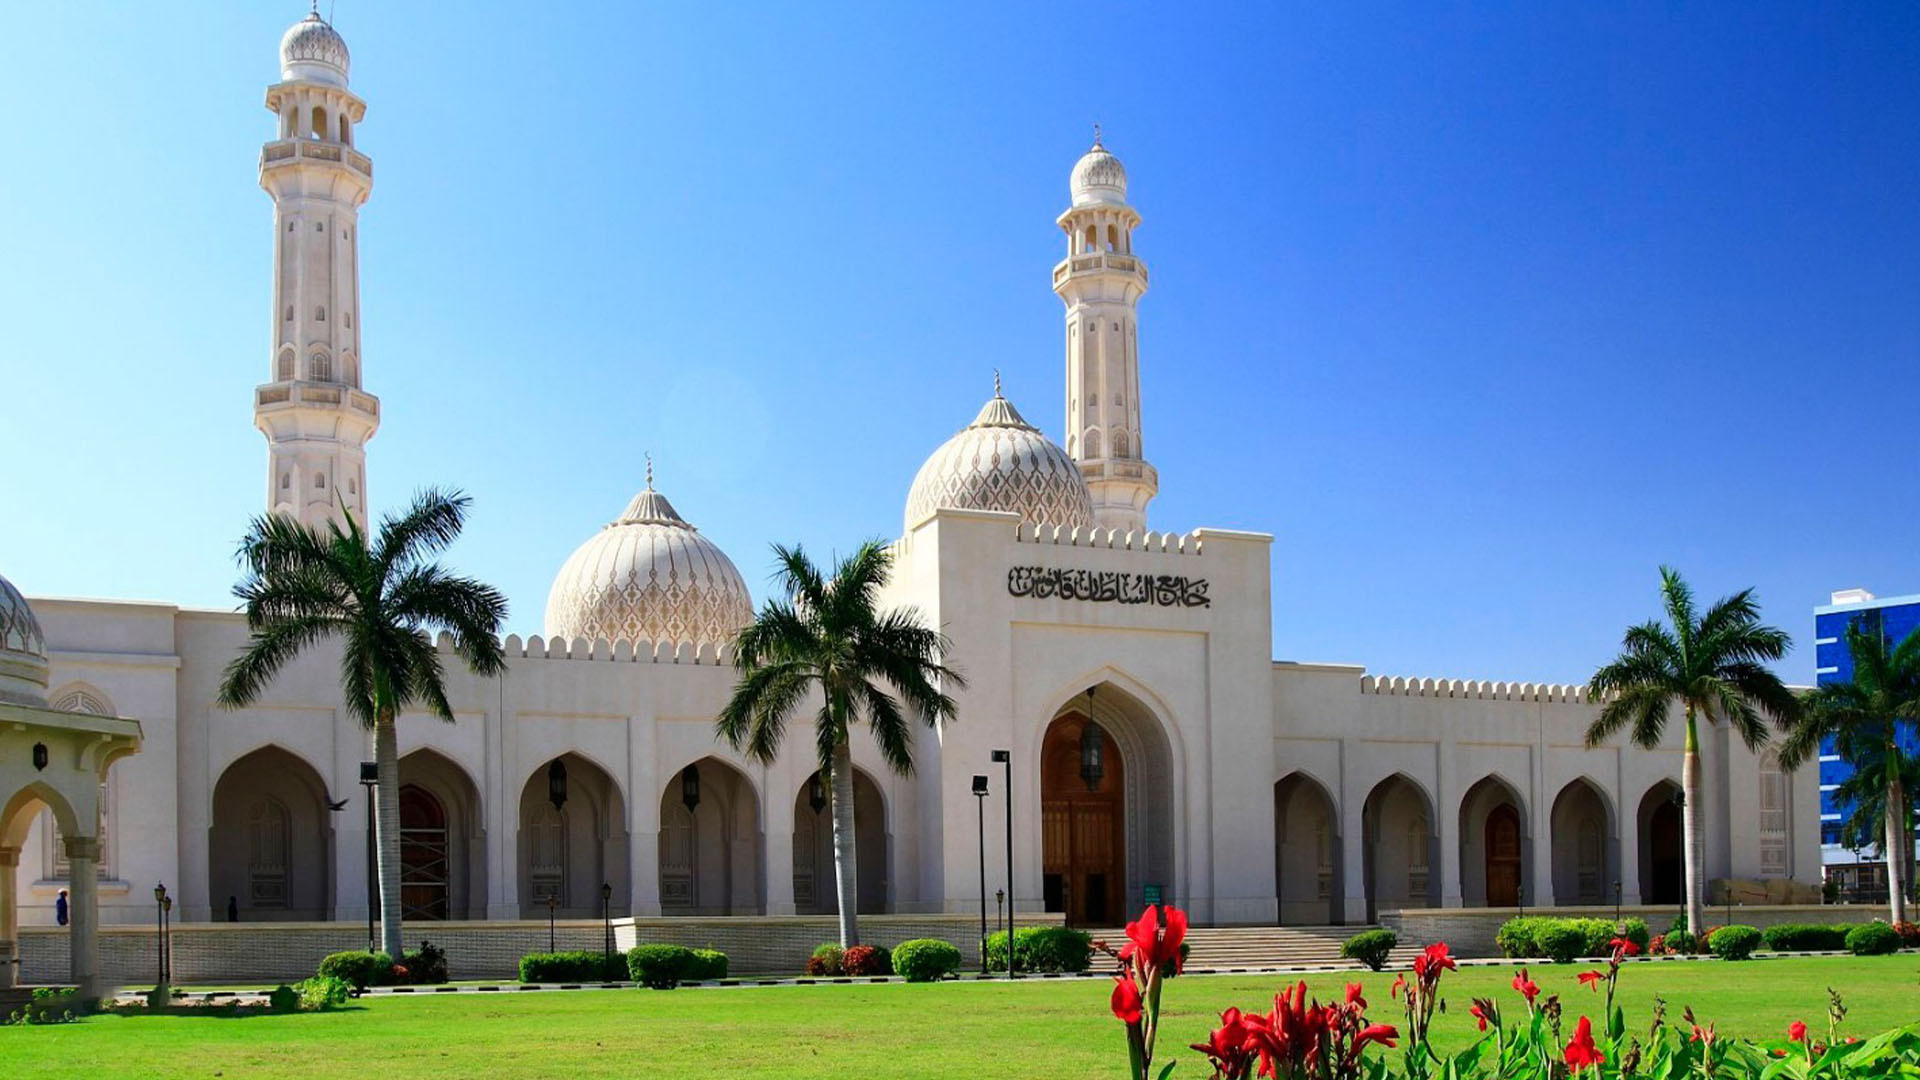 A photograph immortalizes The Sultan Qaboos Mosque in Salalah, renowned for its impressive architecture and intricate decorations.